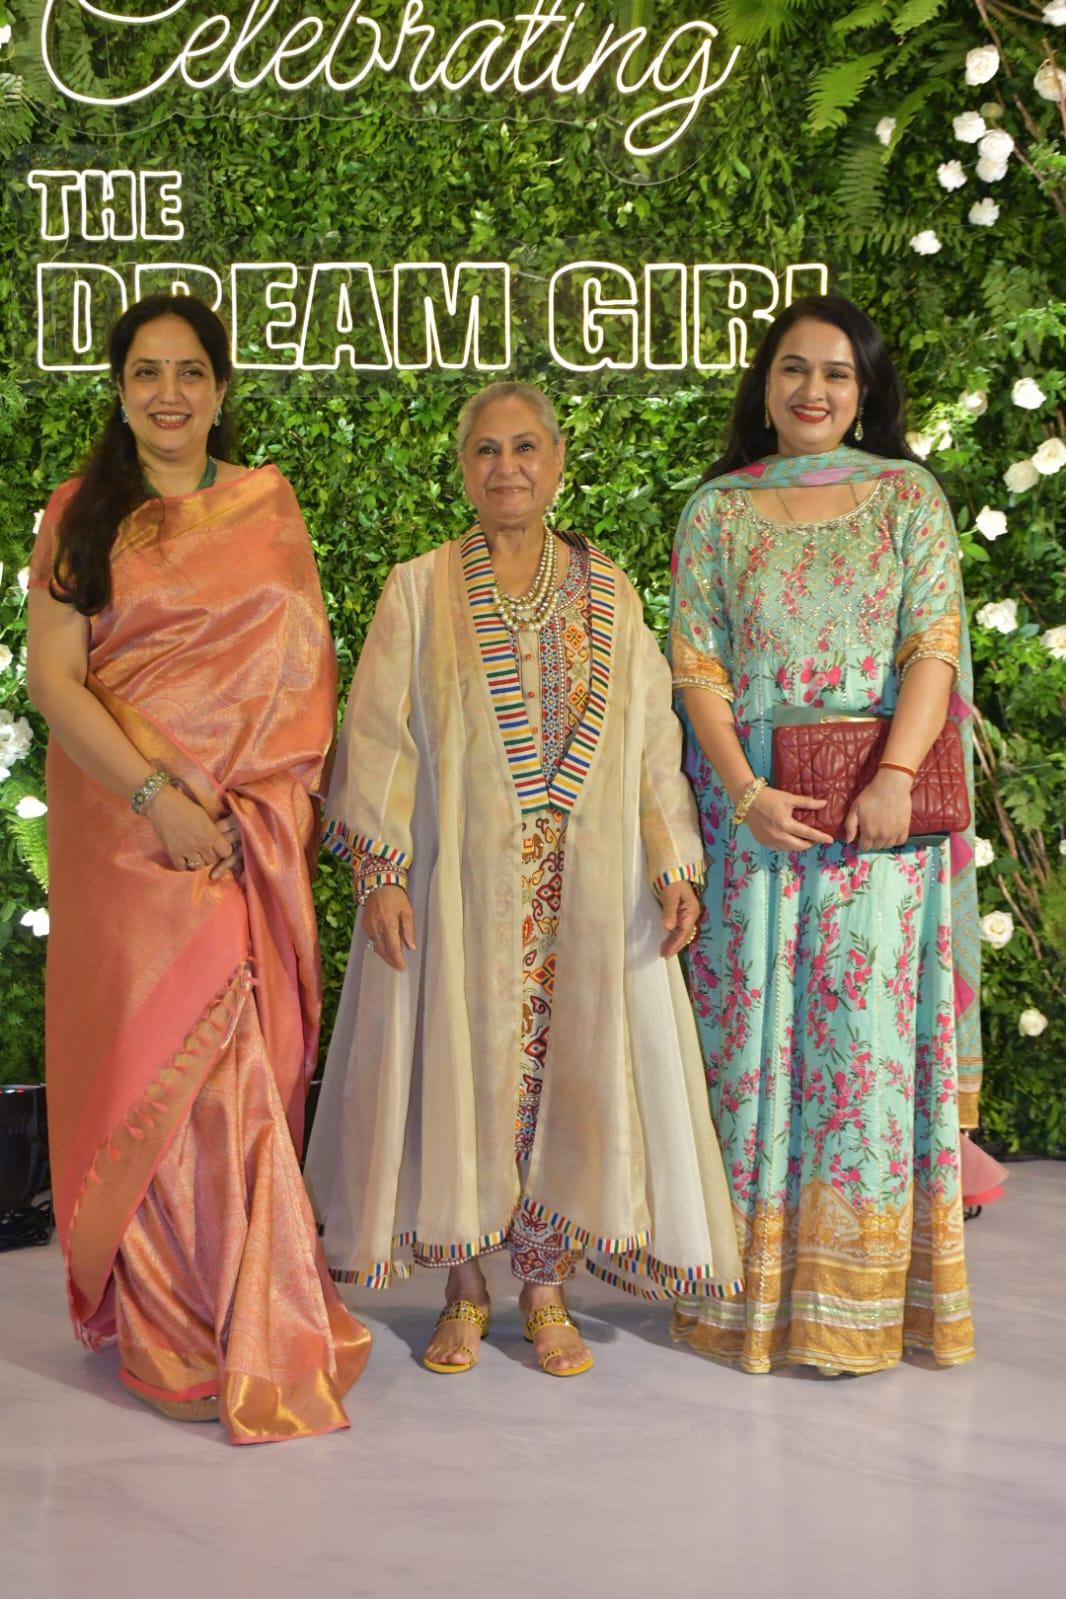 Jaya Bachchan graciously posed for the paps